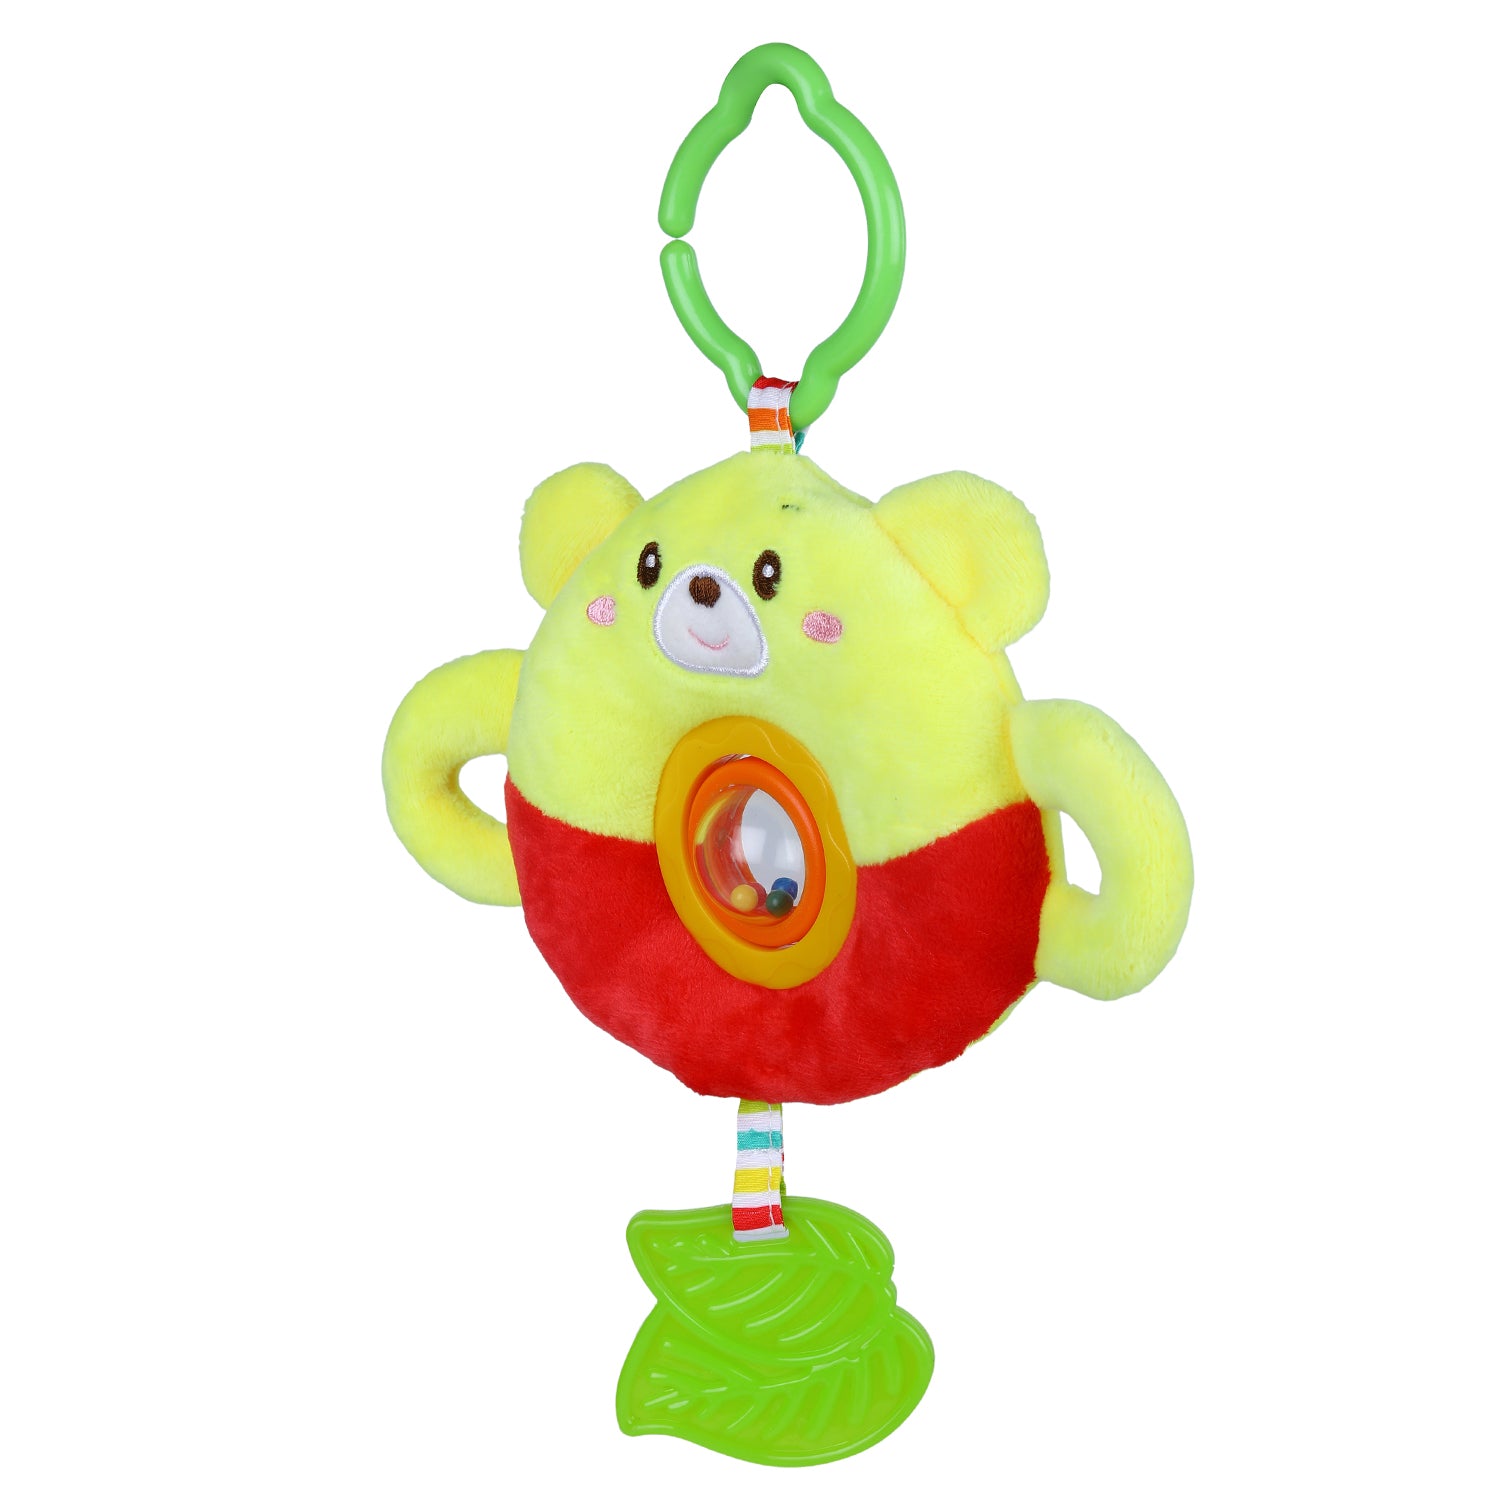 Bear Stroller Crib Hanging Plush Rattle Toy With Teether - Yellow